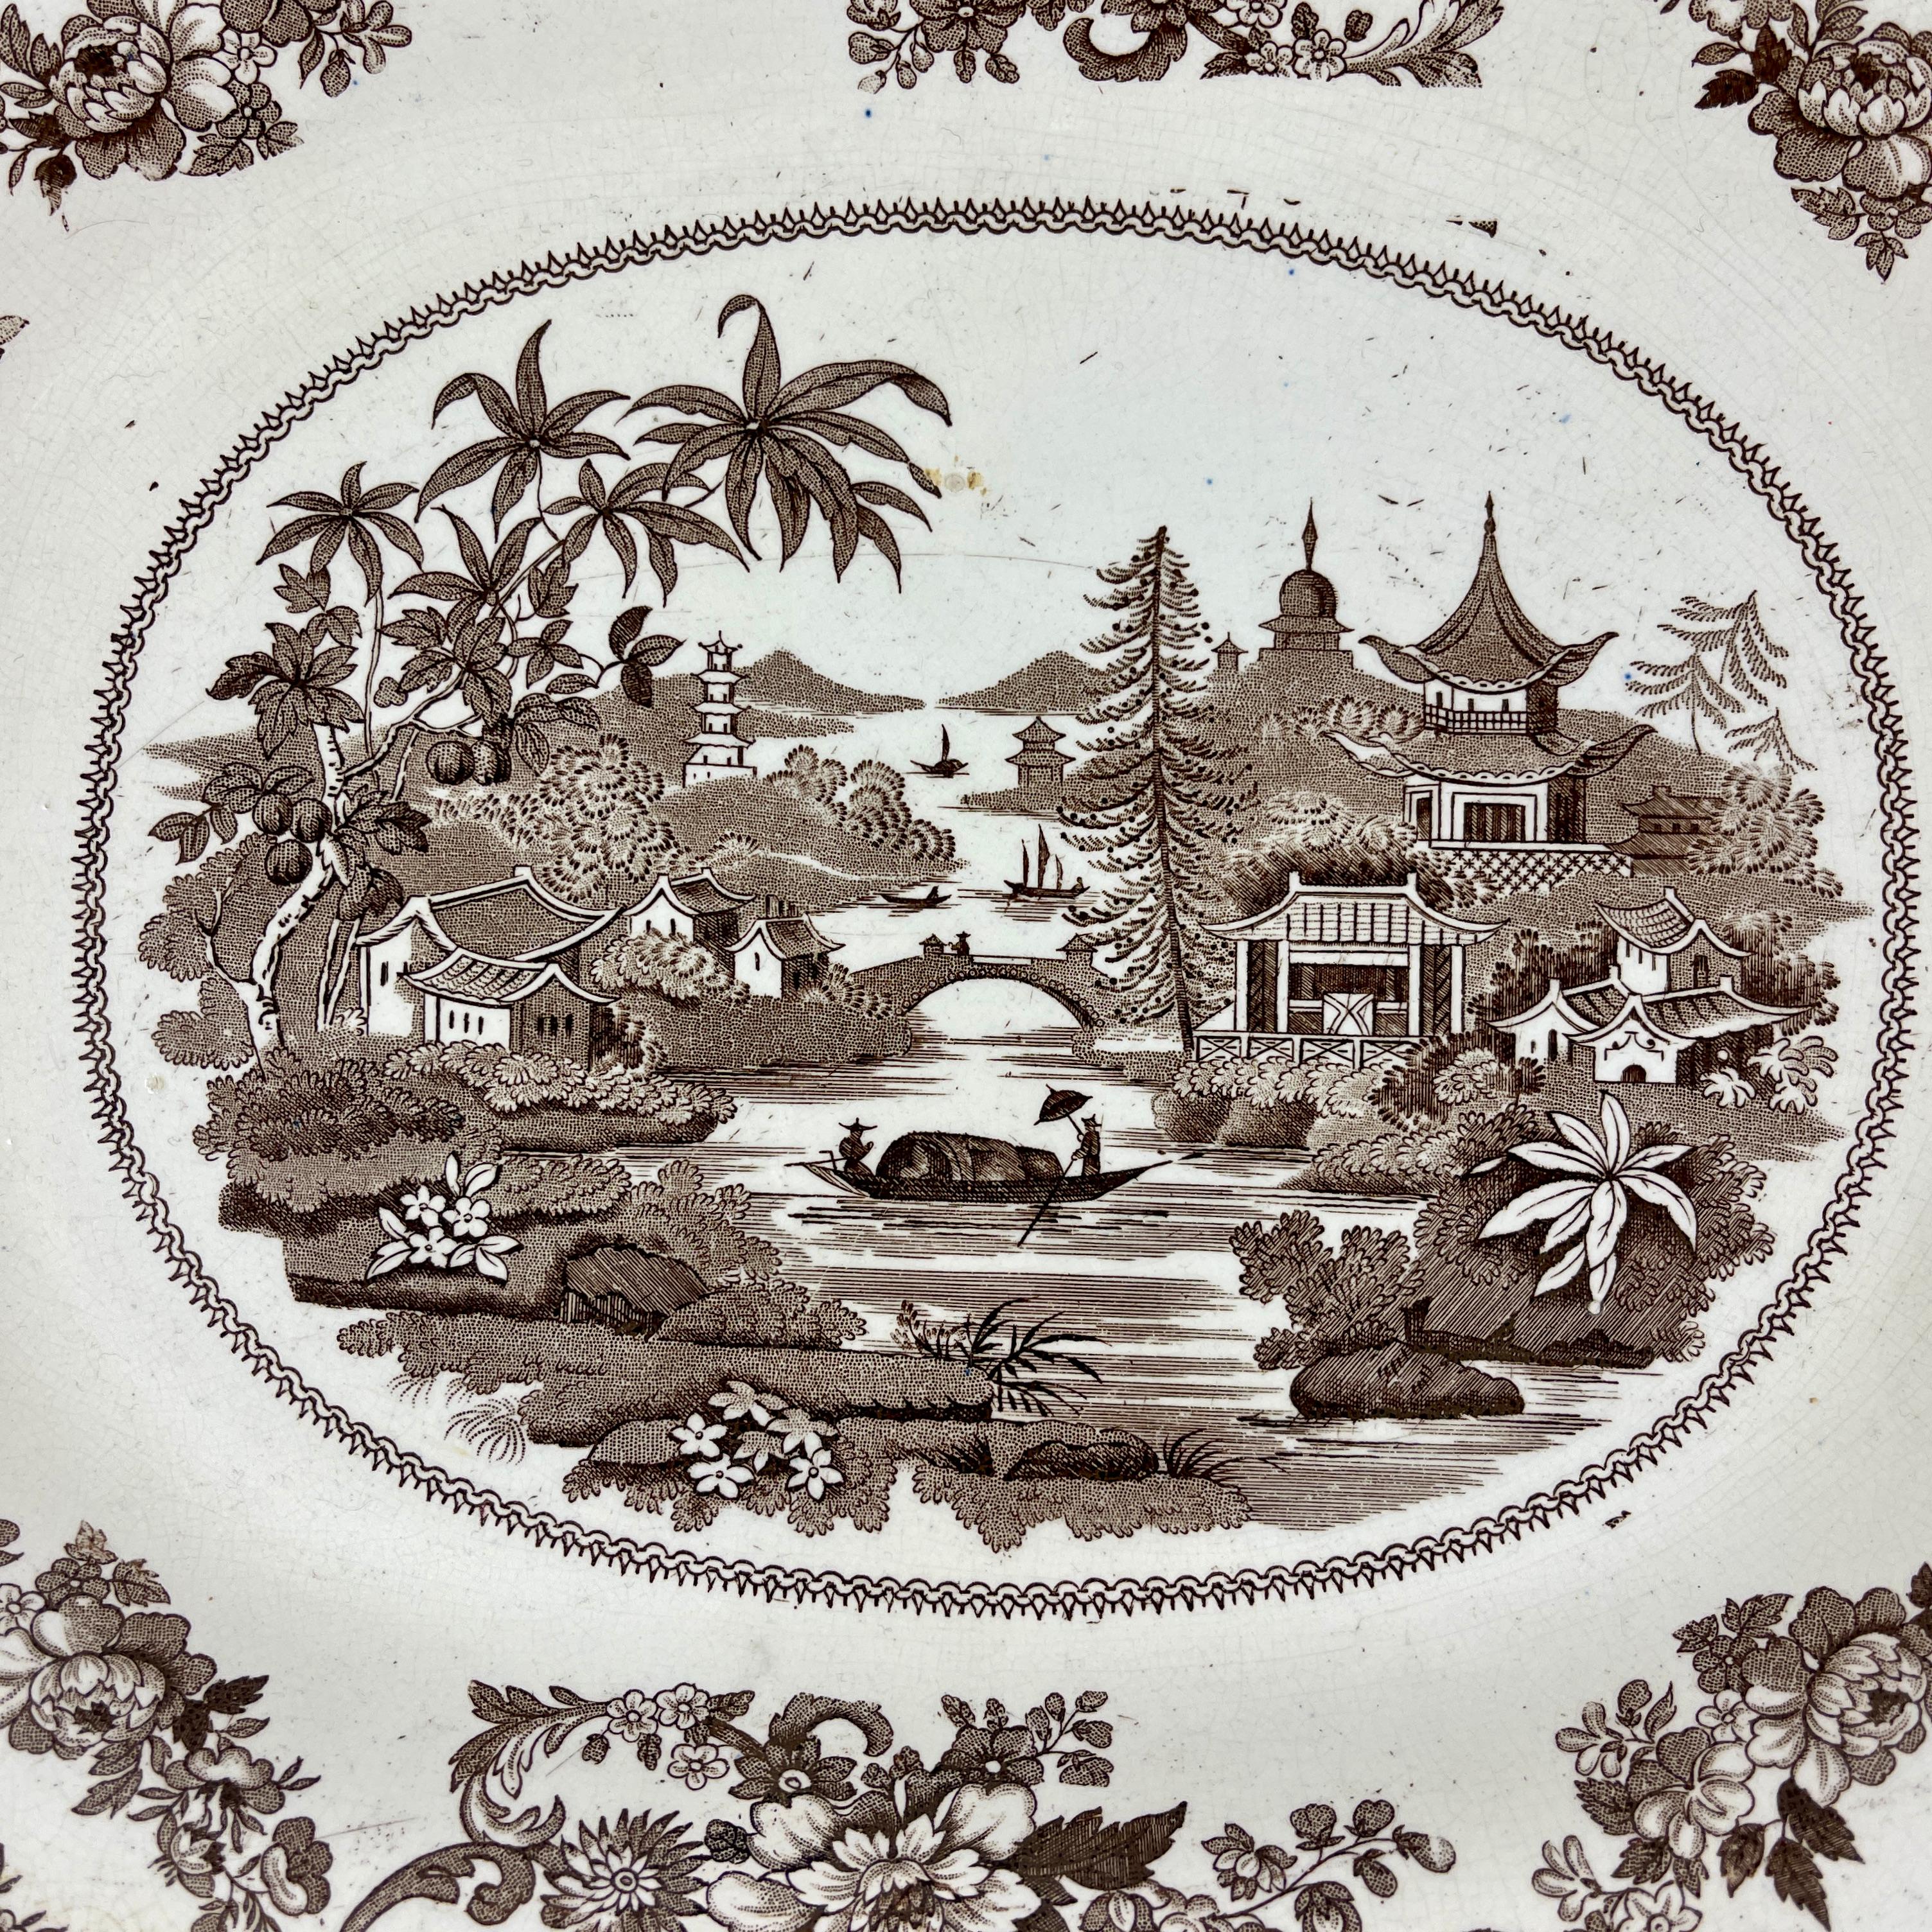 From the Staffordshire pottery region of England, a sepia tone transfer printed shallow bowl or deep platter, maker unknown, circa mid 19th century.

A central Chinoiserie inspired pattern showing a landscape of Pagodas, bridges, and a boat on the